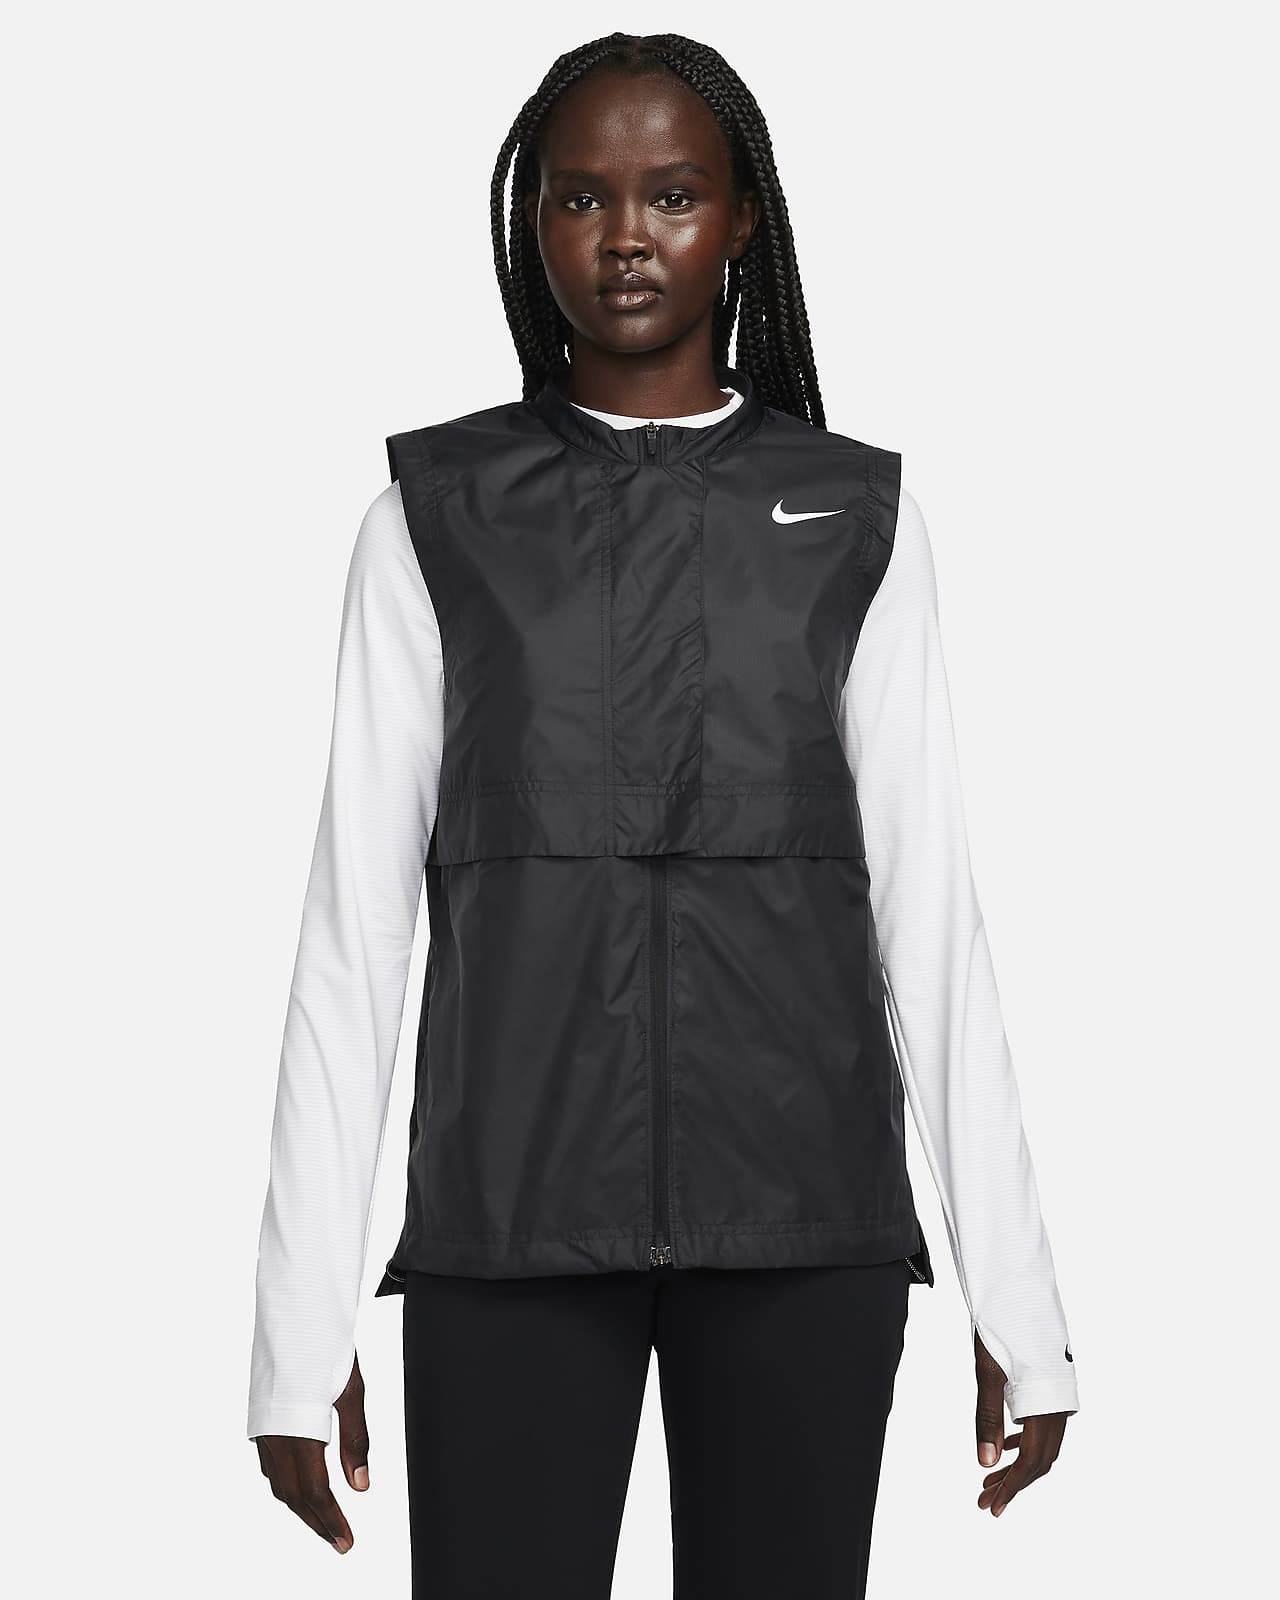 Chaleco para correr con relleno sintético Nike Nothing Stops Us Chelsea -  Negro - Mujer